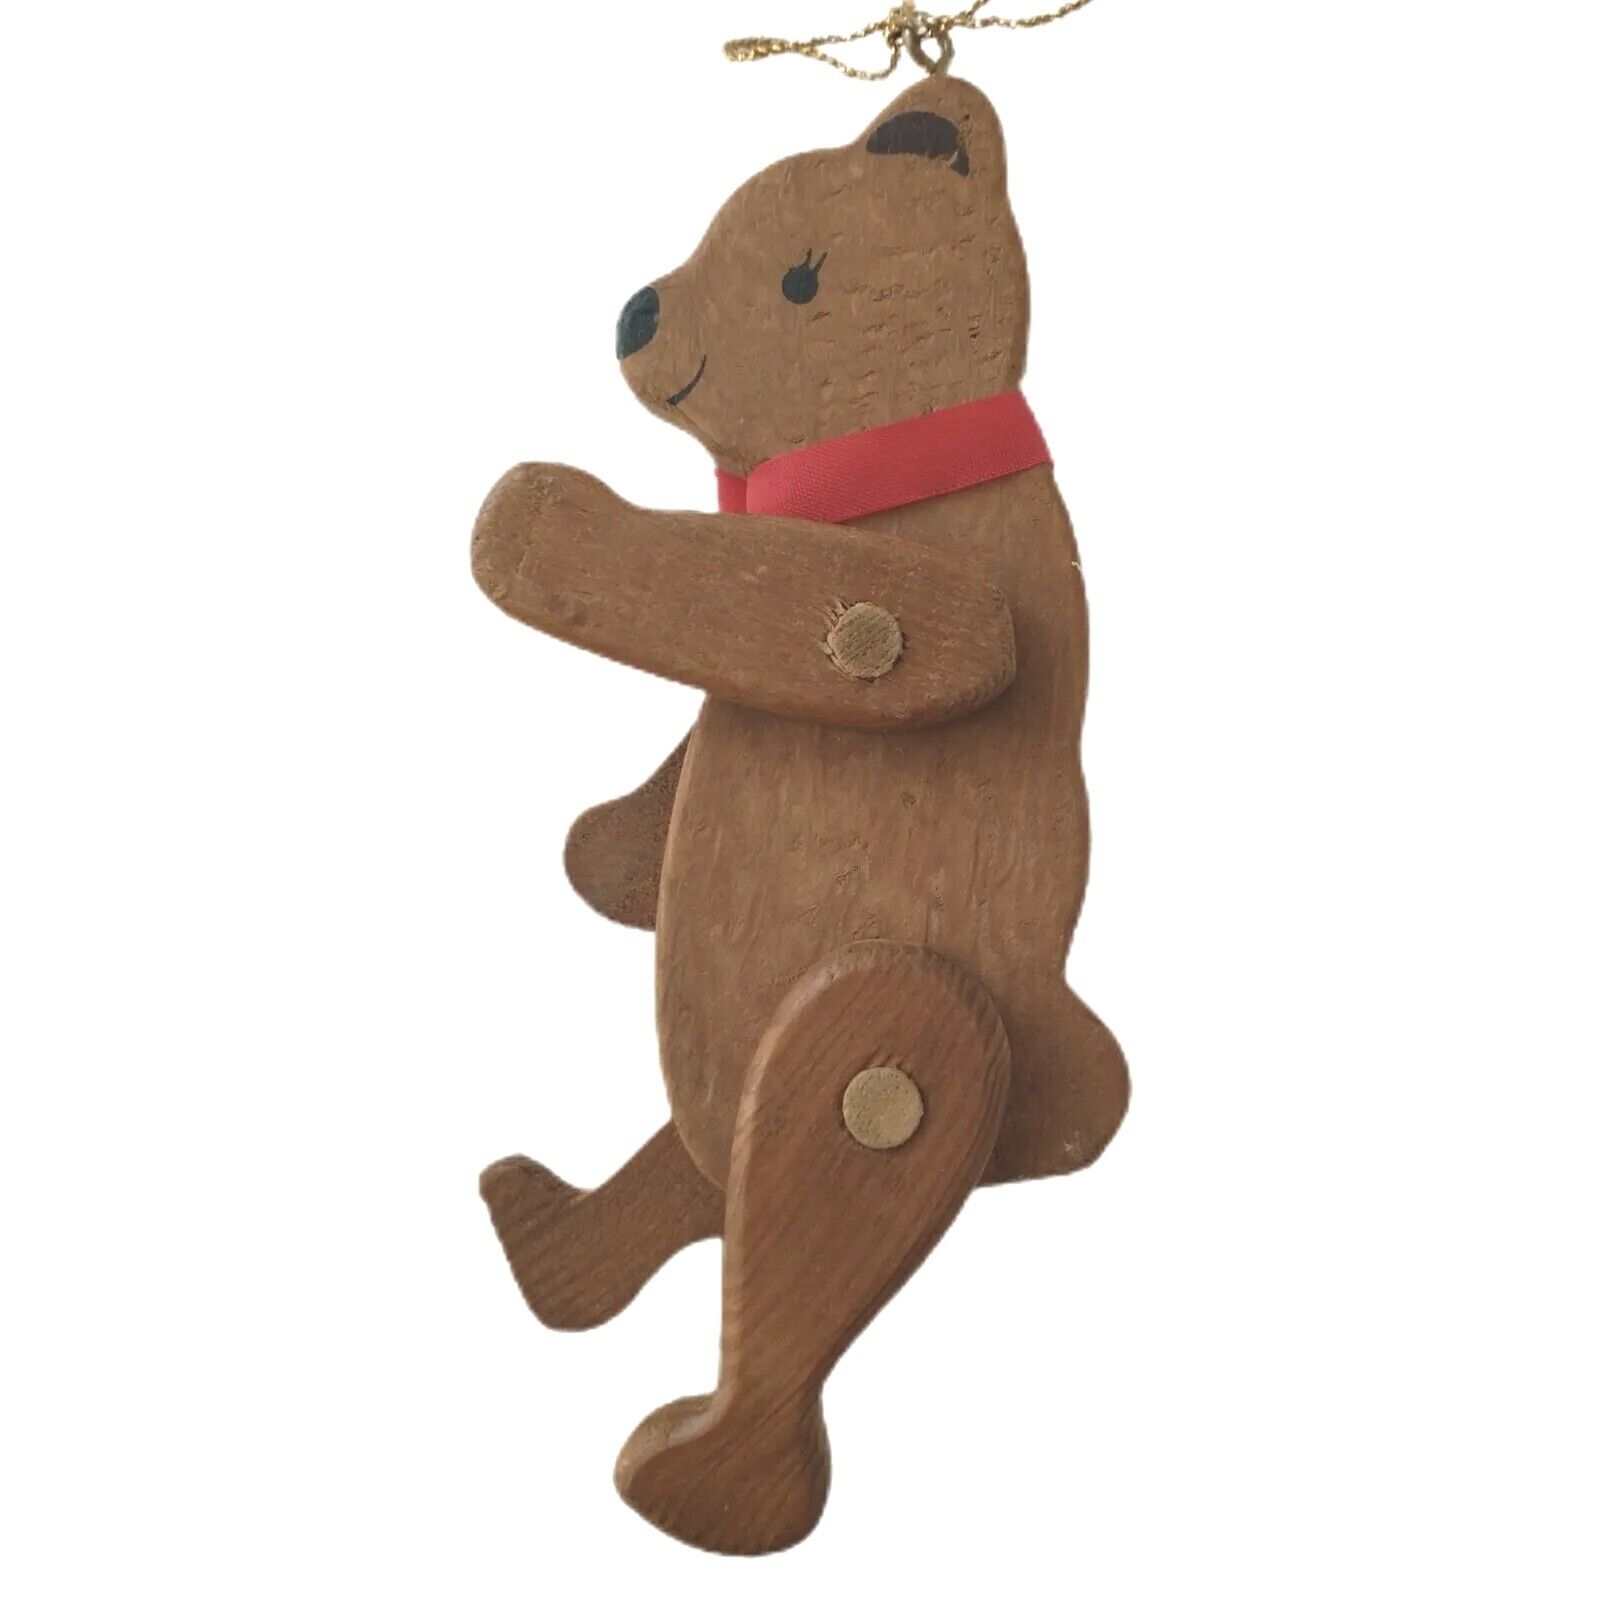 Midwest Of Cannon Falls Wooden Bear Ornament JOINTED Christmas Farmhouse Rustic